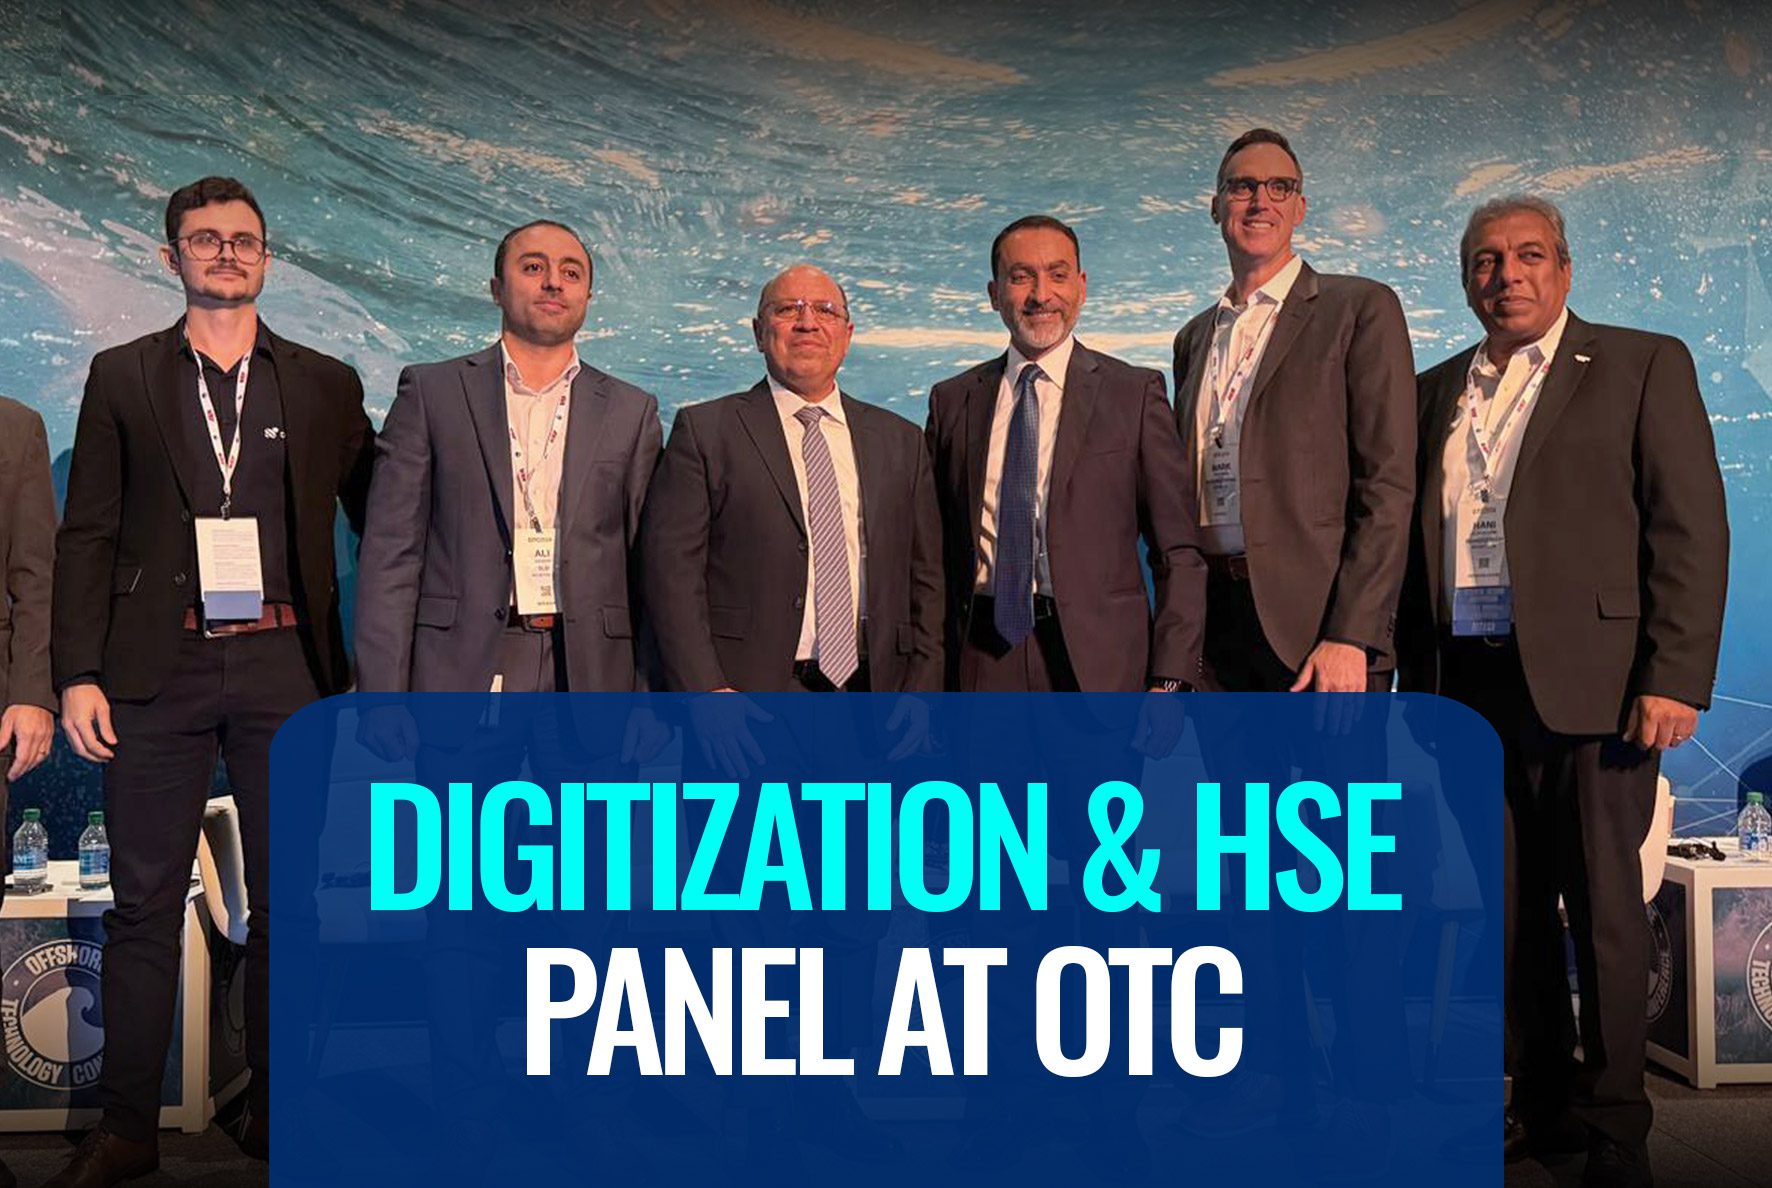 Featured image for “Digitization & HSEpanel at OTC”